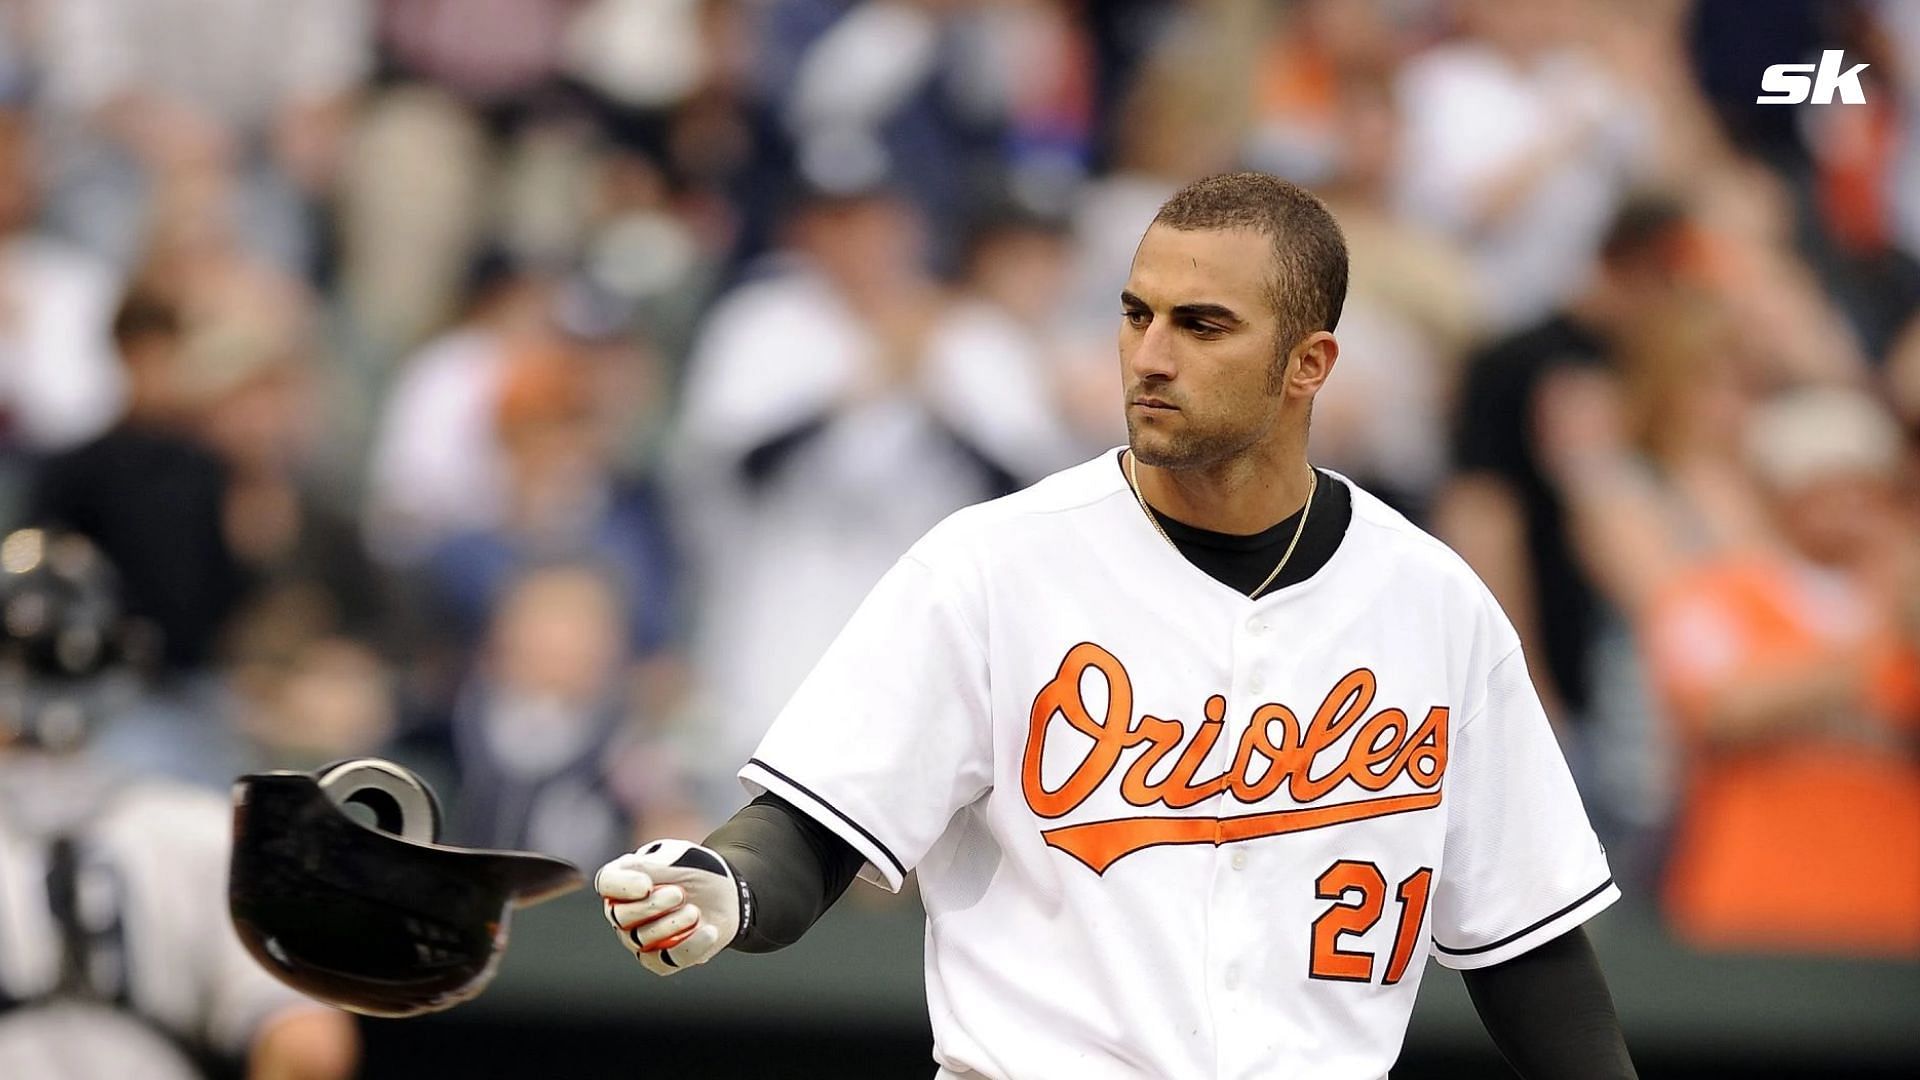 Nick Markakis once wanted Houston Astros players guilty of